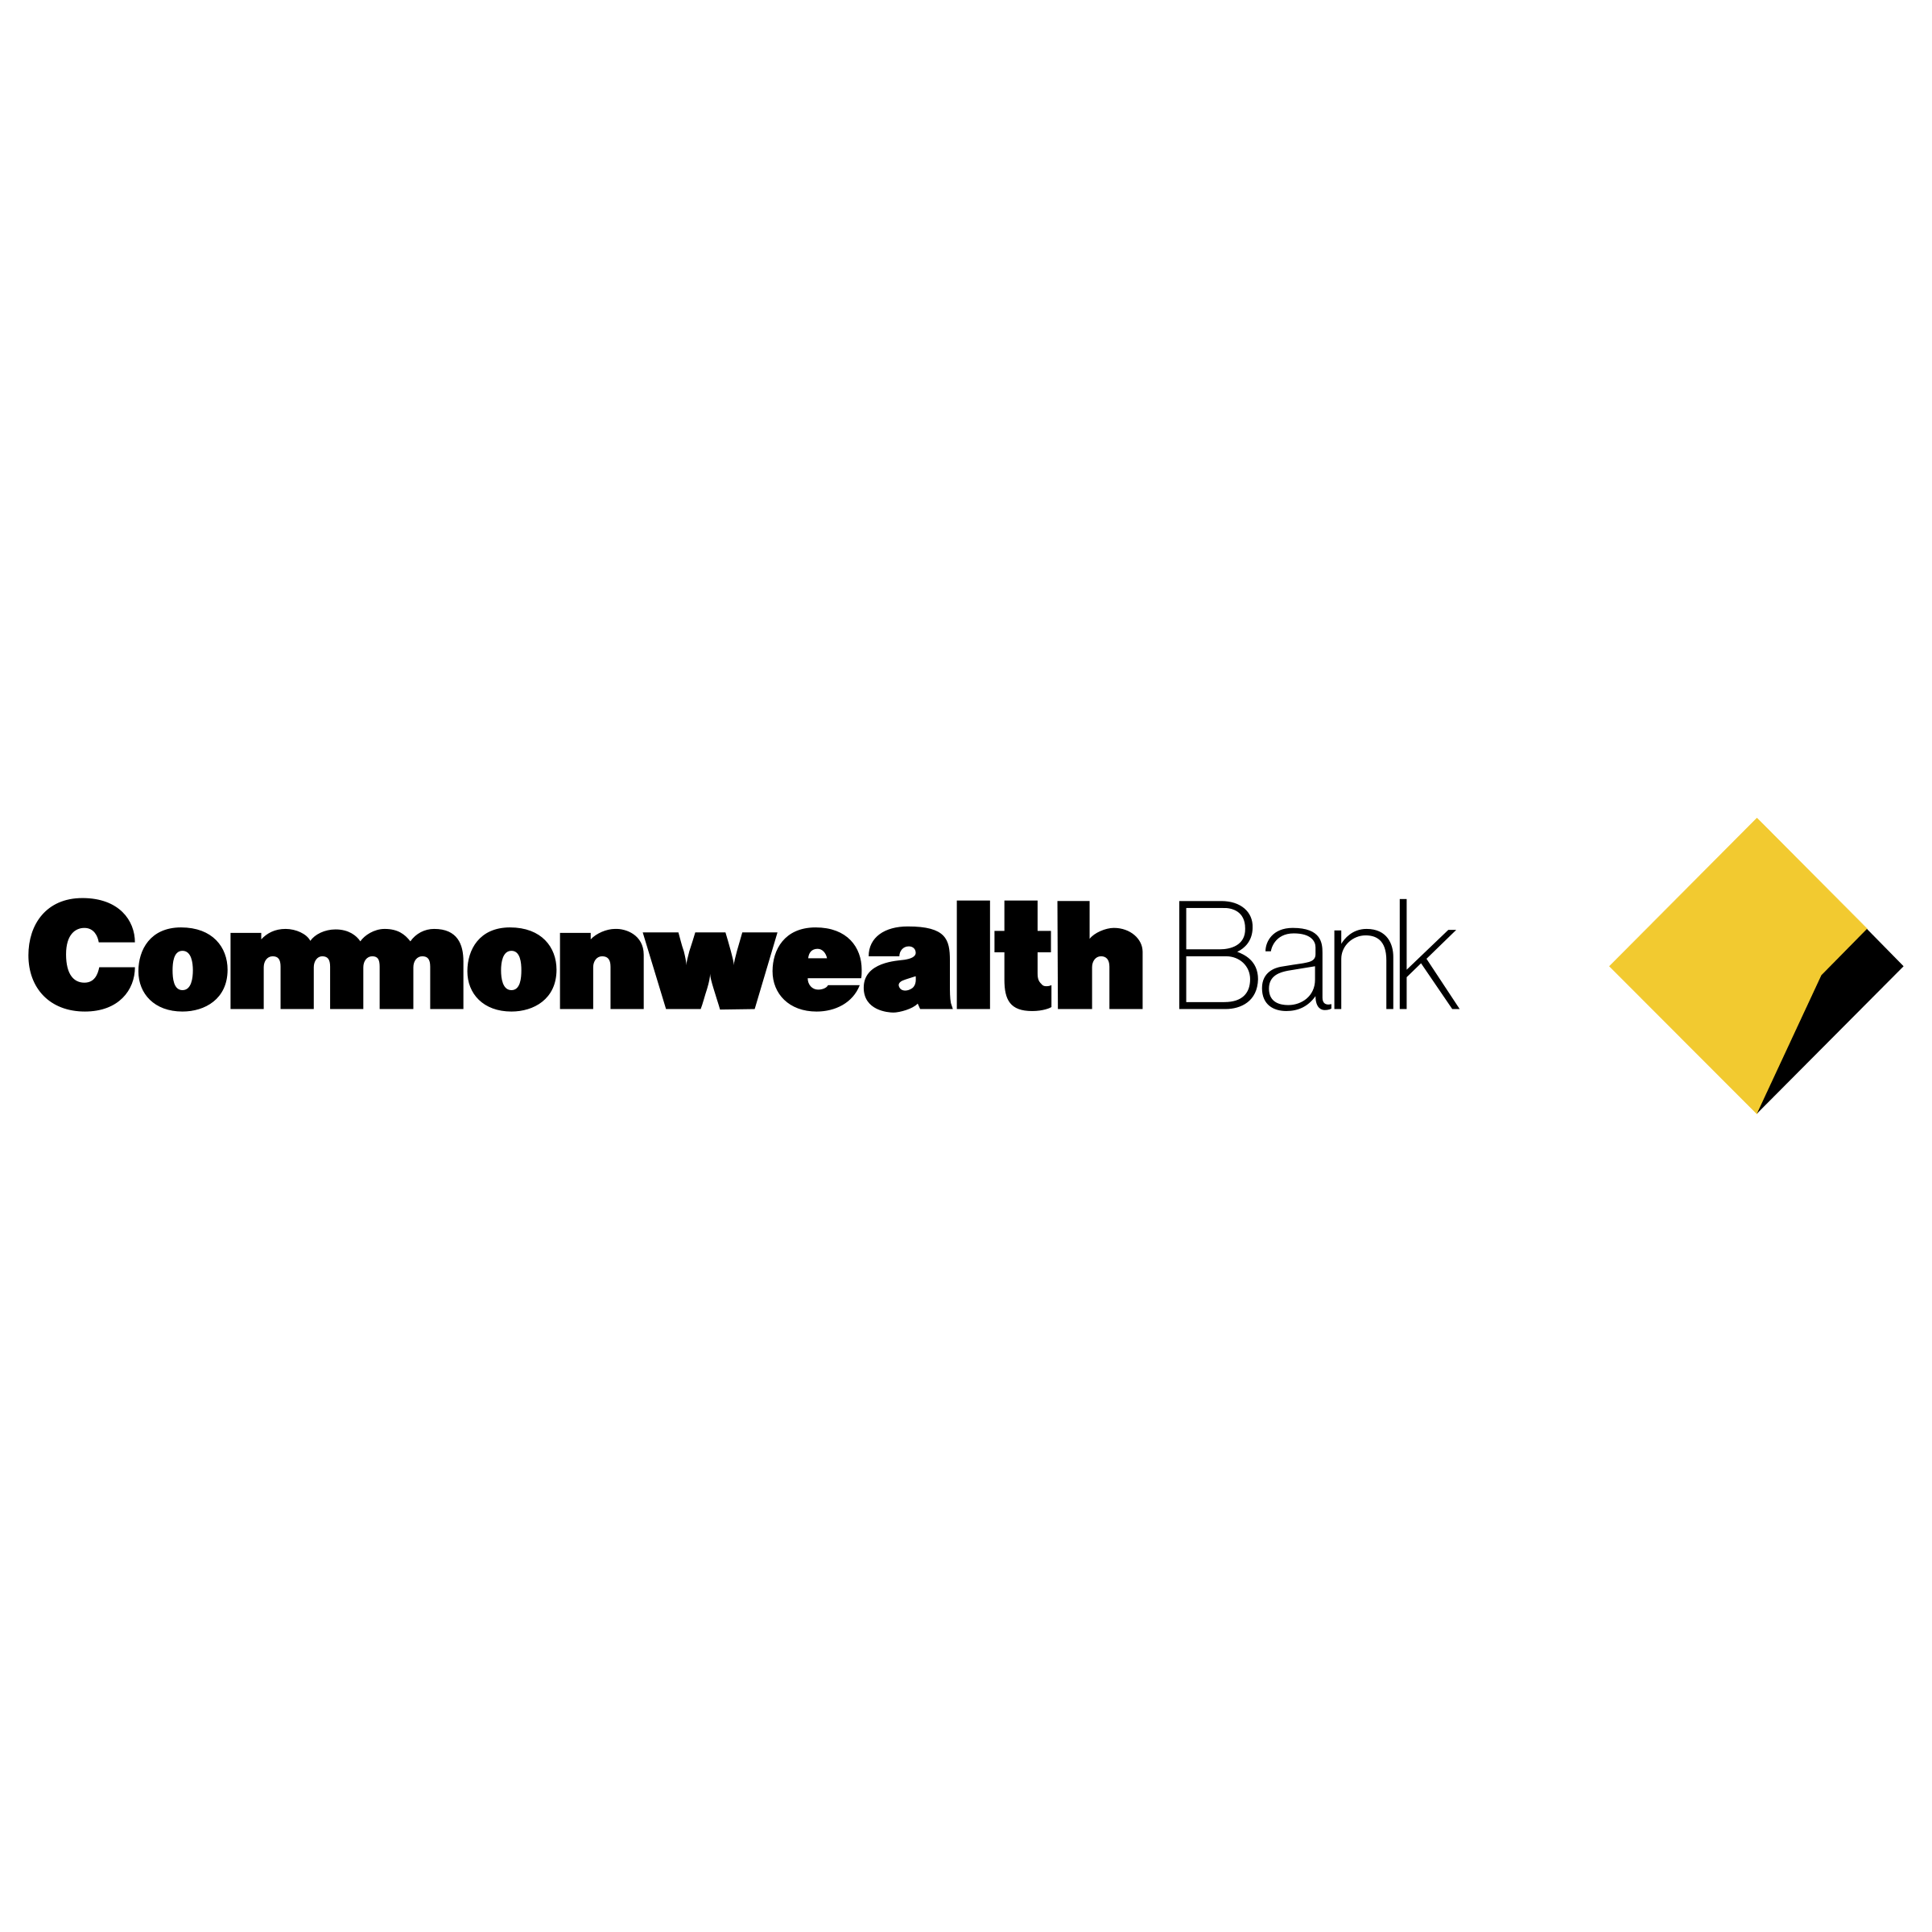 Commonwealth Logo - Commonwealth Bank Logo PNG Transparent & SVG Vector - Freebie Supply